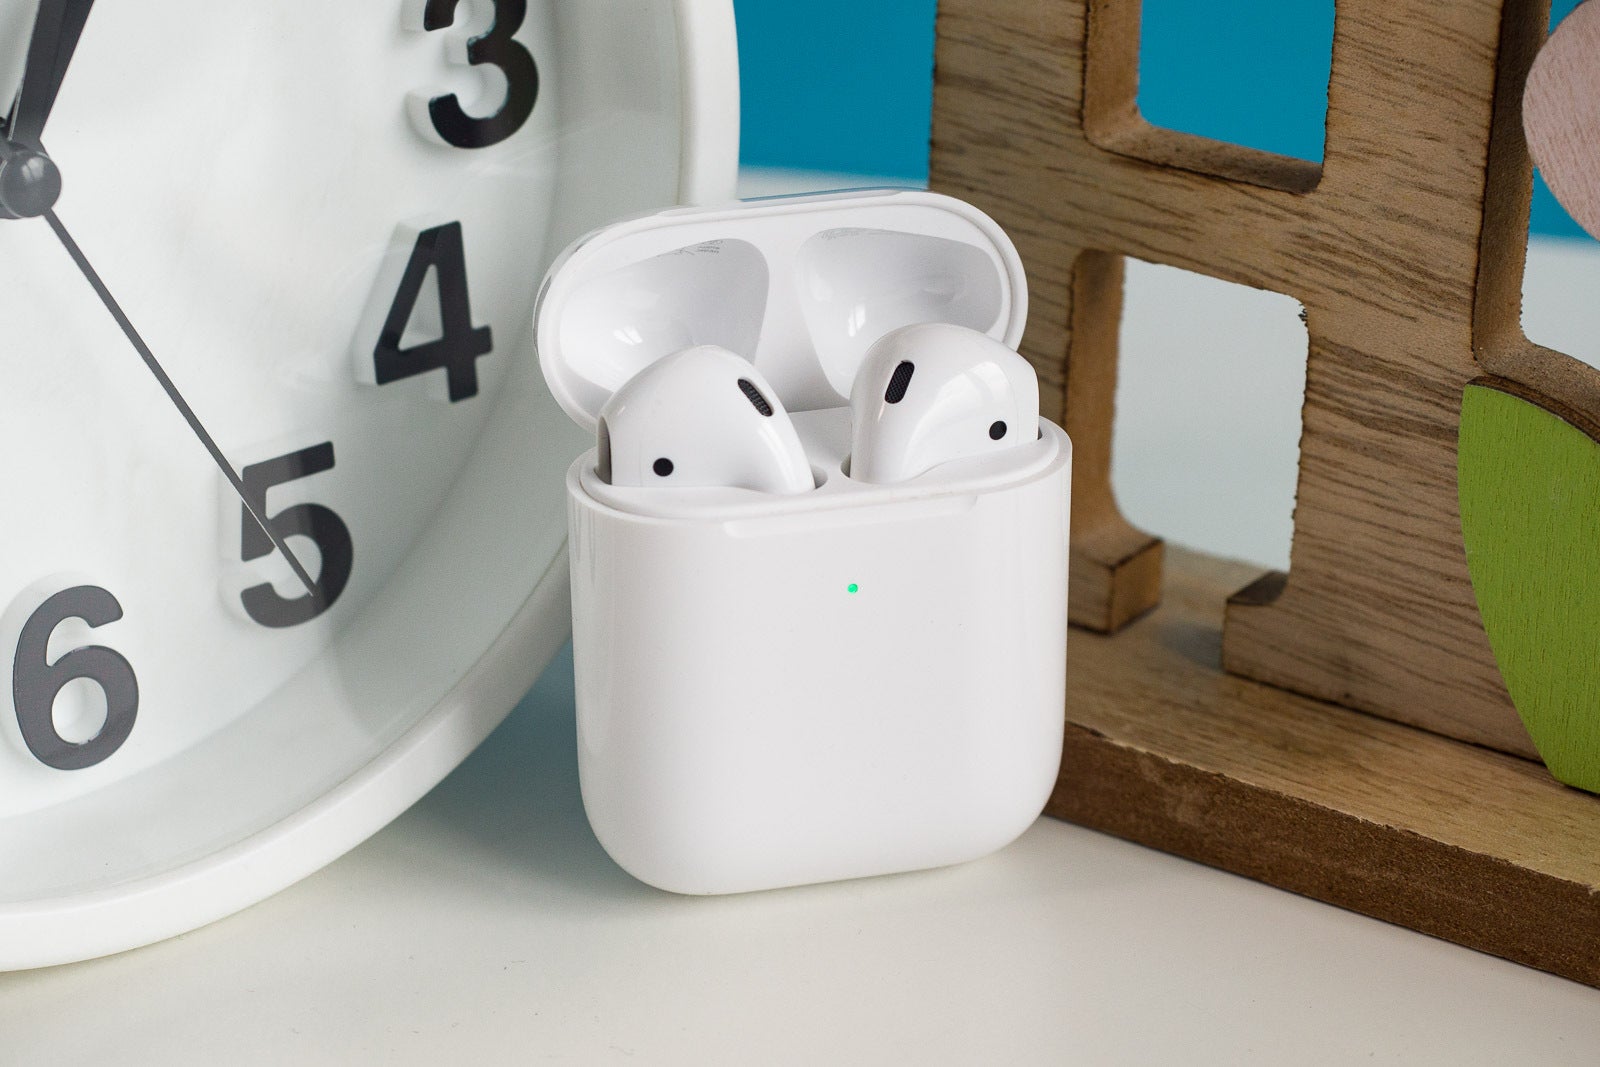 Apple's 2019 AirPods - Apple report details iPhone Pro, AirPods 3, iPad upgrades, much more